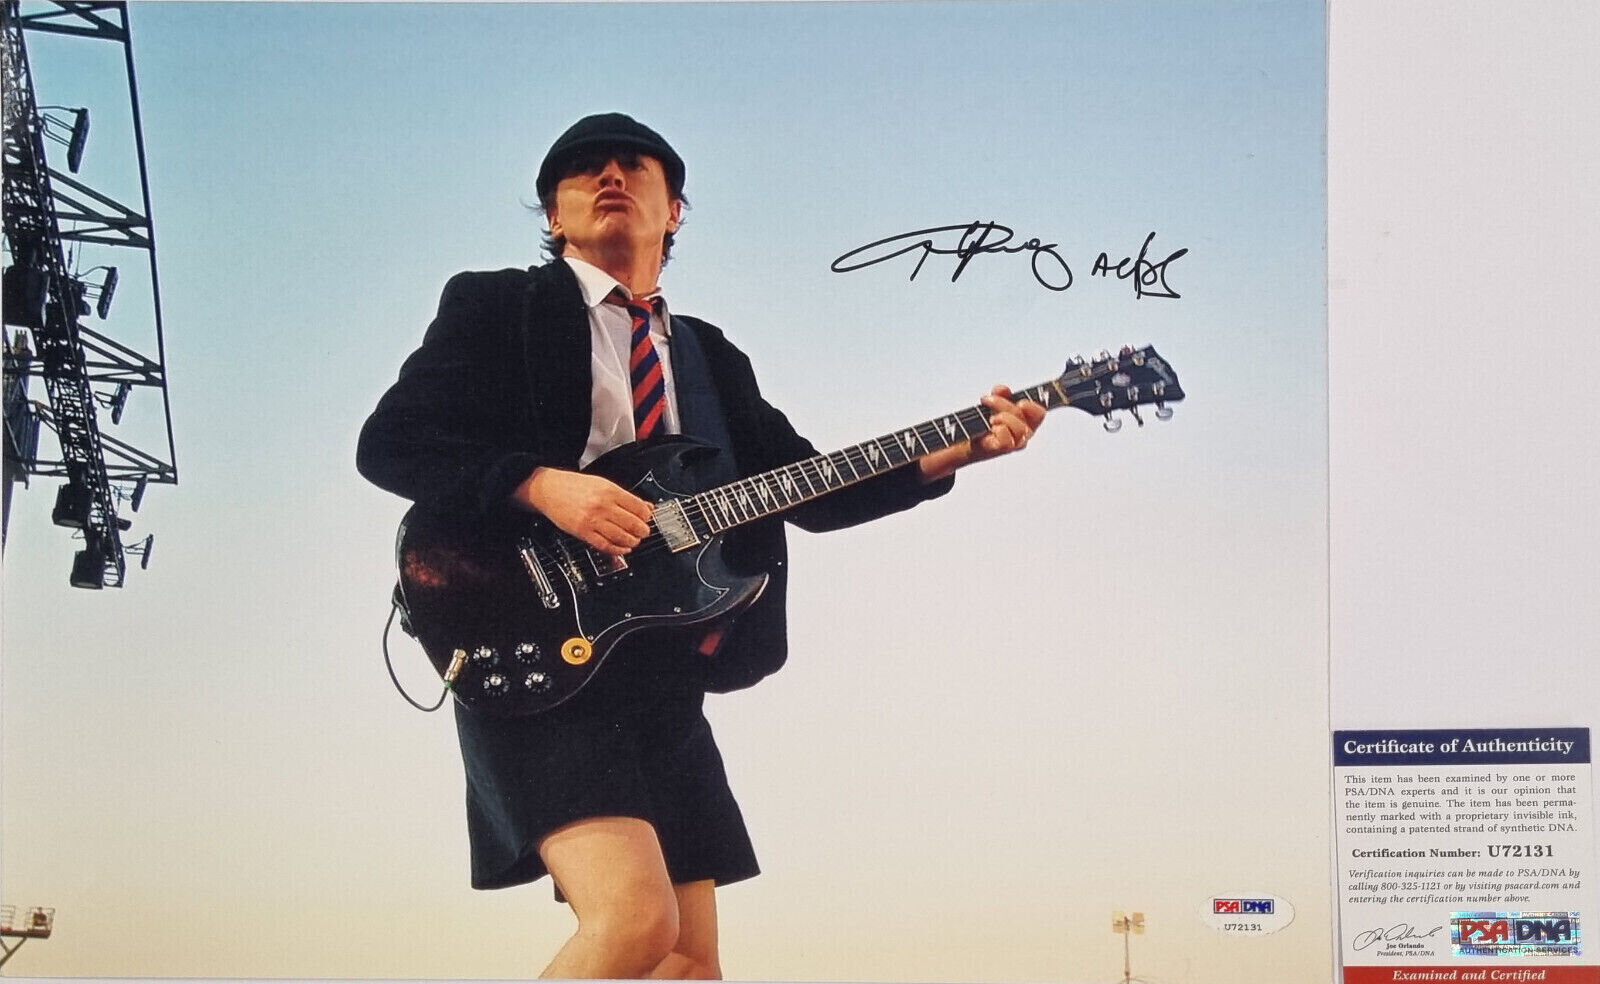 ACDC Angus Young hand signed 11x14 inch photograph (PSA DNA #U72131)